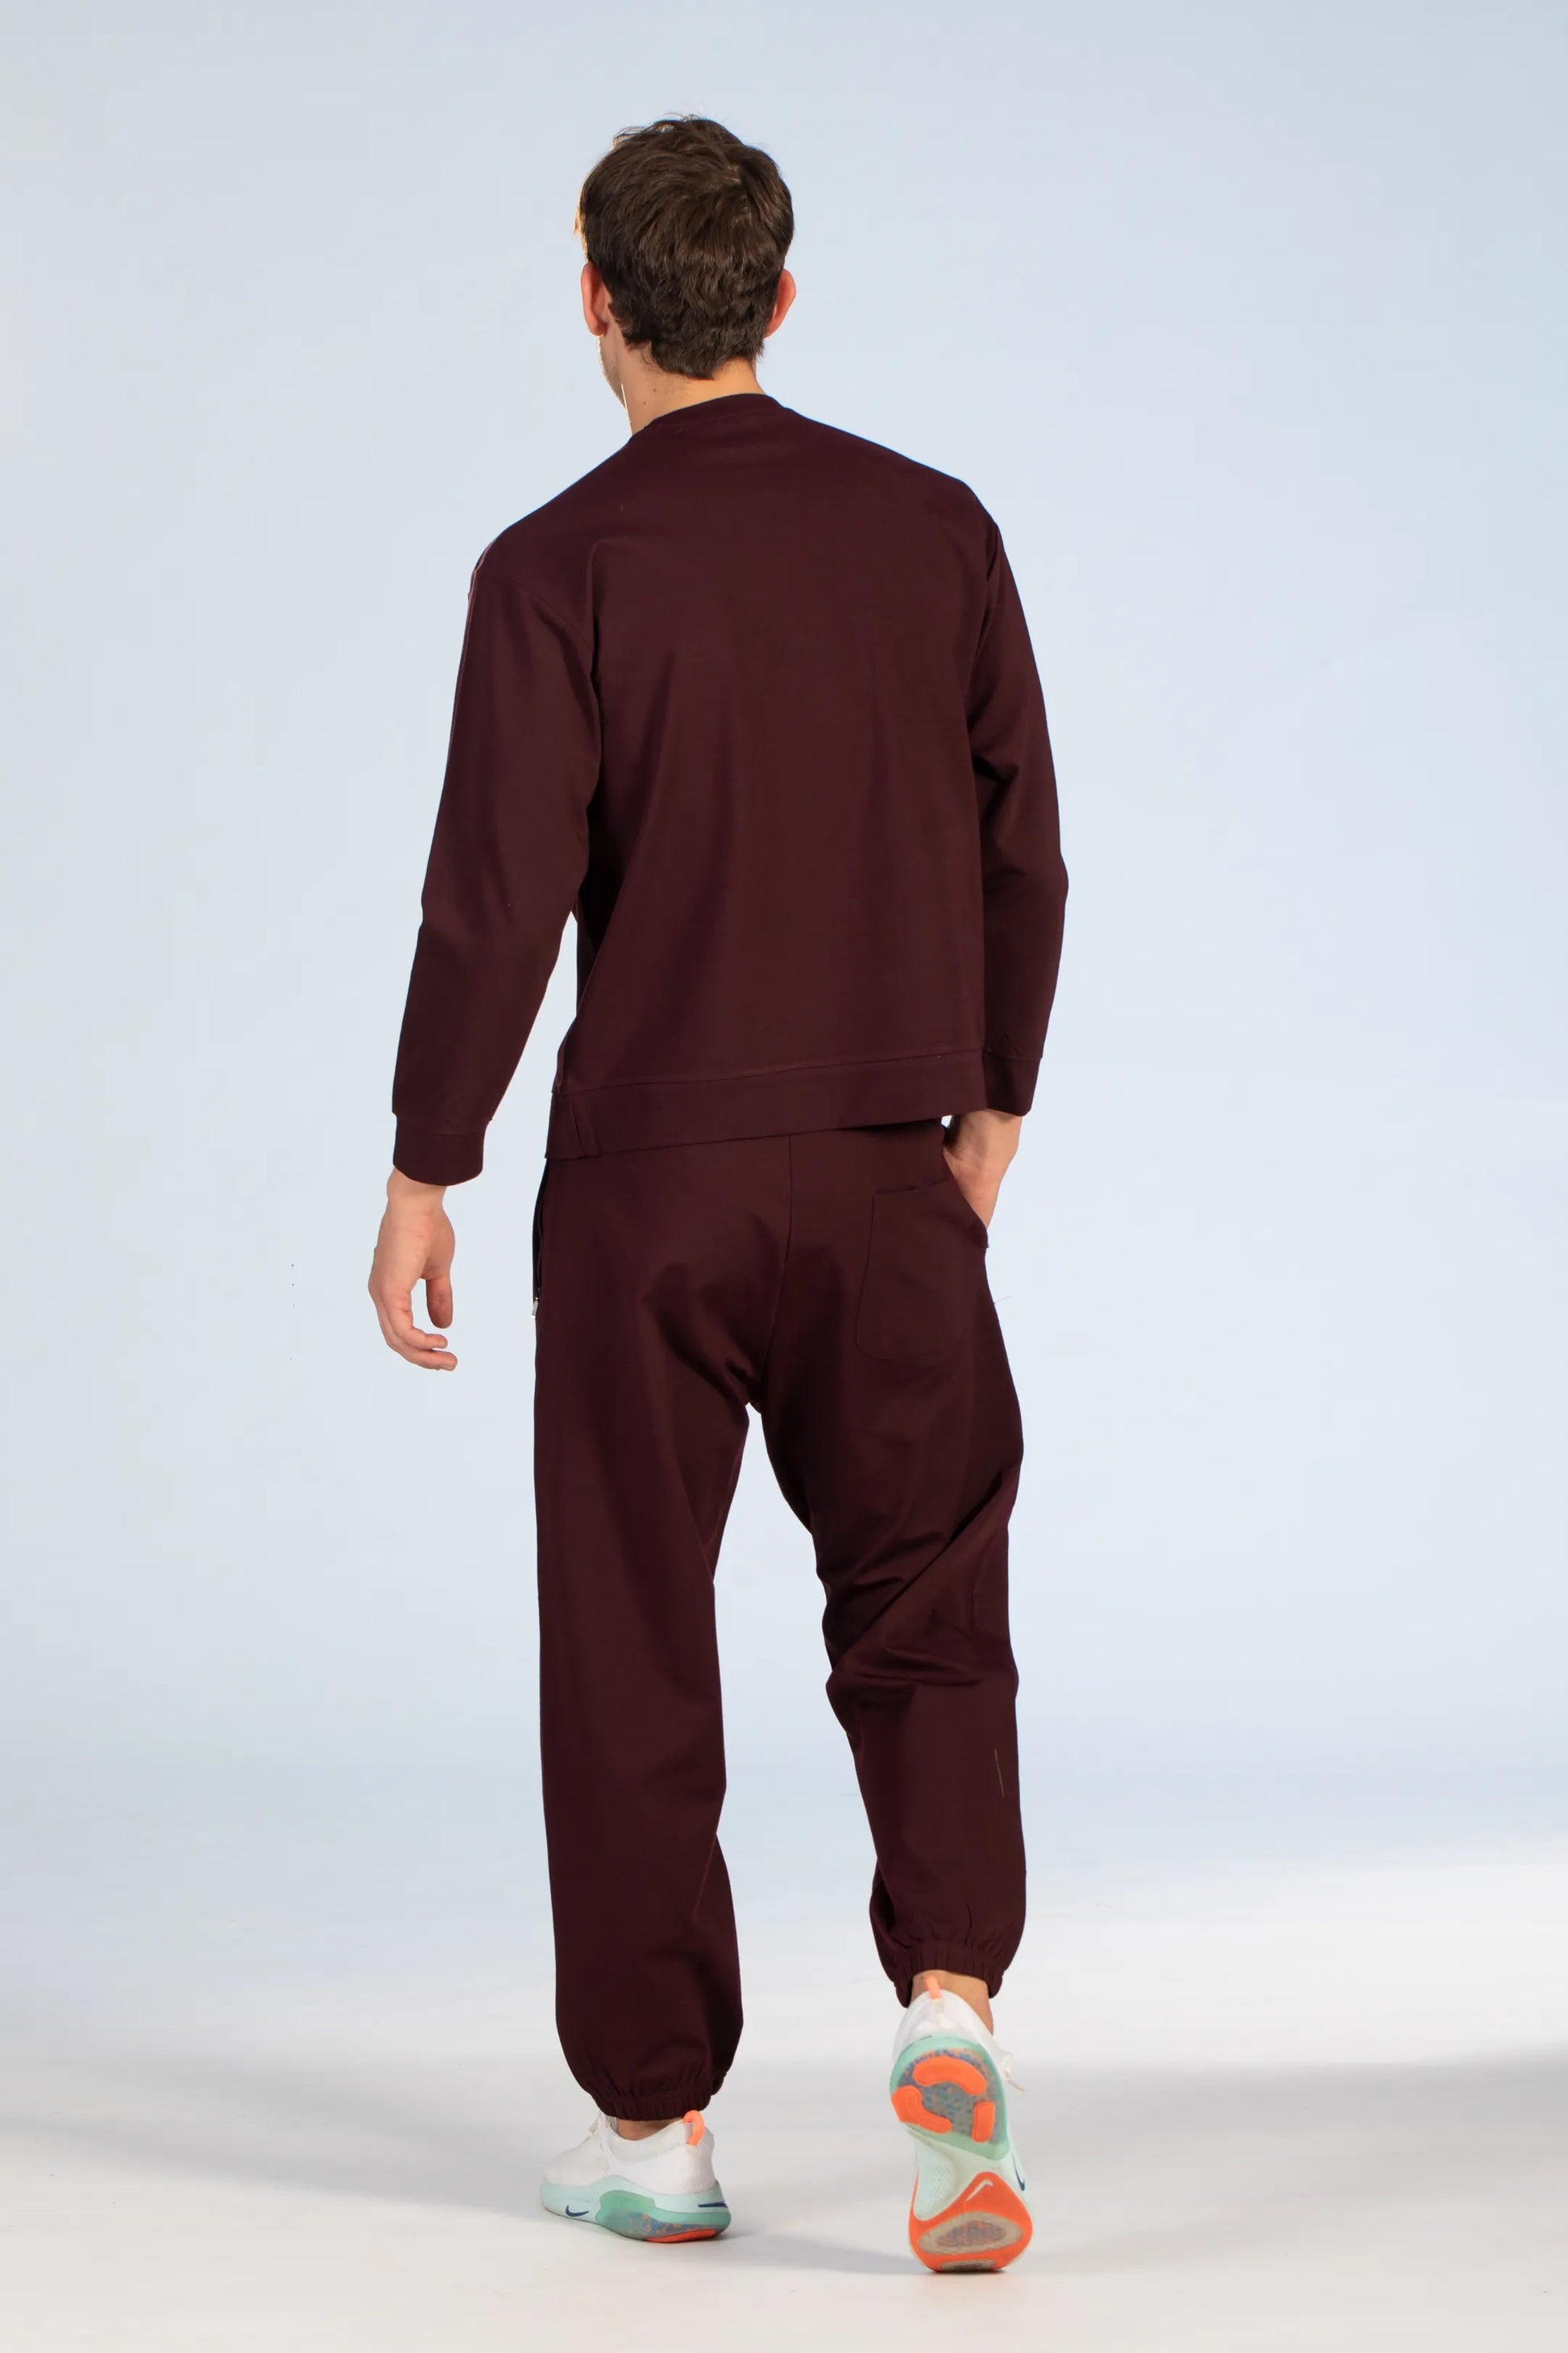 Burgundy Signature Embroidered Co-Ords Set